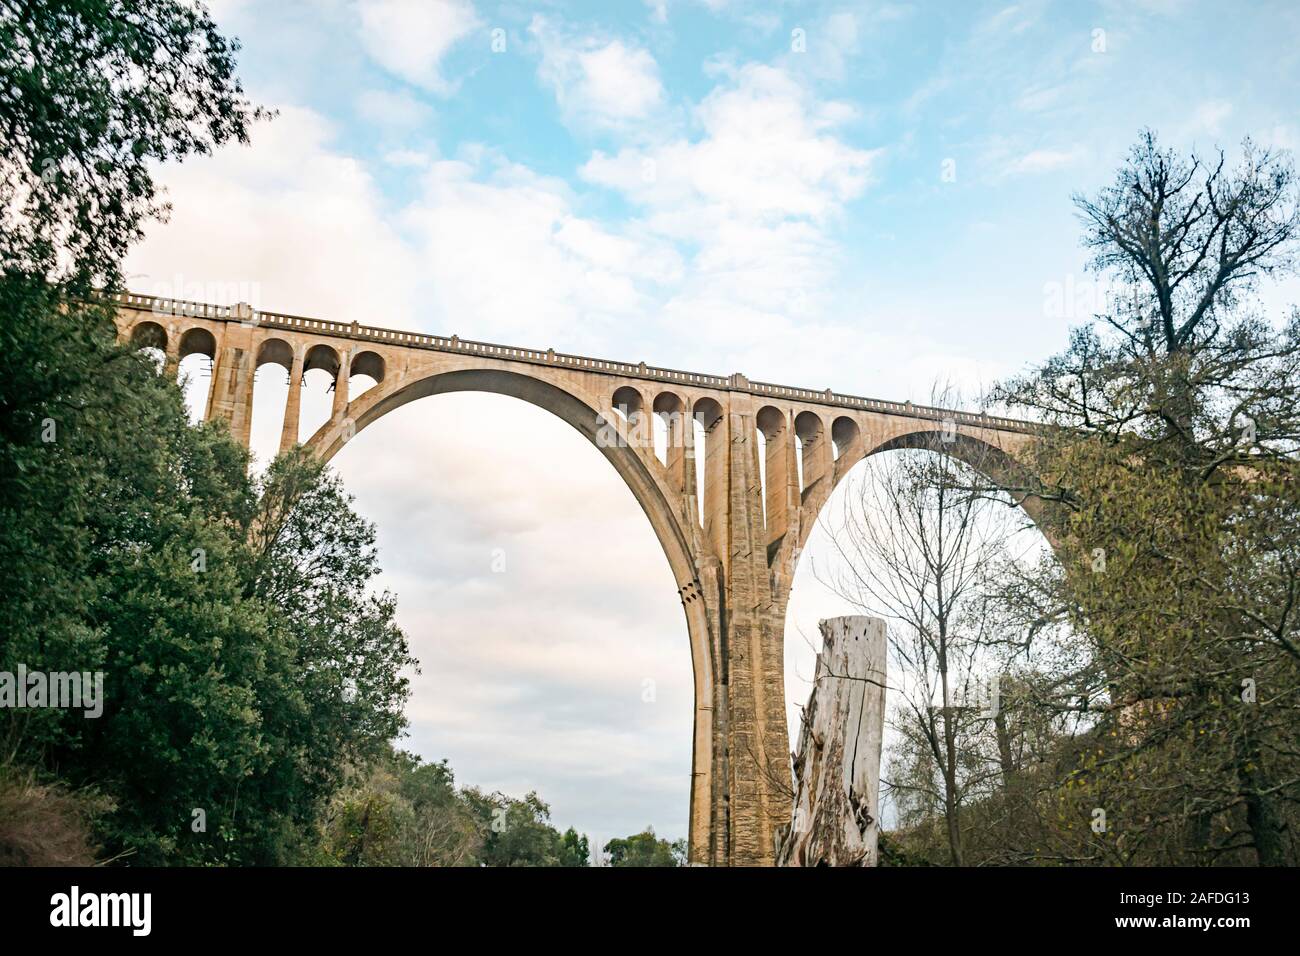 Large bridge with several eyes in each arch to reinforce its structure and sustainability Stock Photo